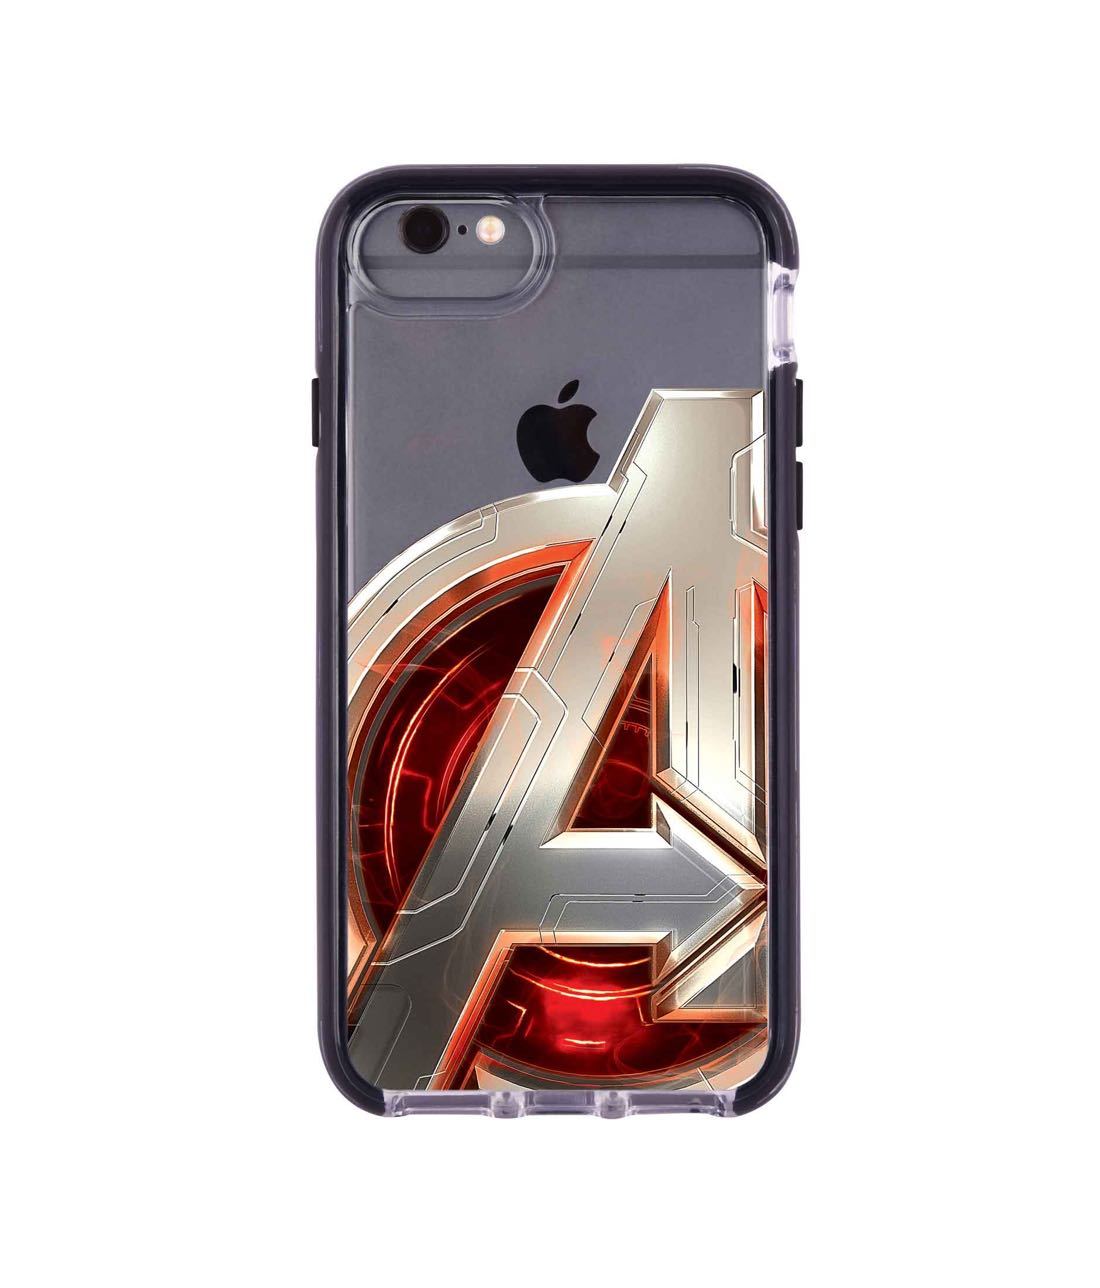 Avengers Version 2 - Extreme Phone Case for iPhone 6S